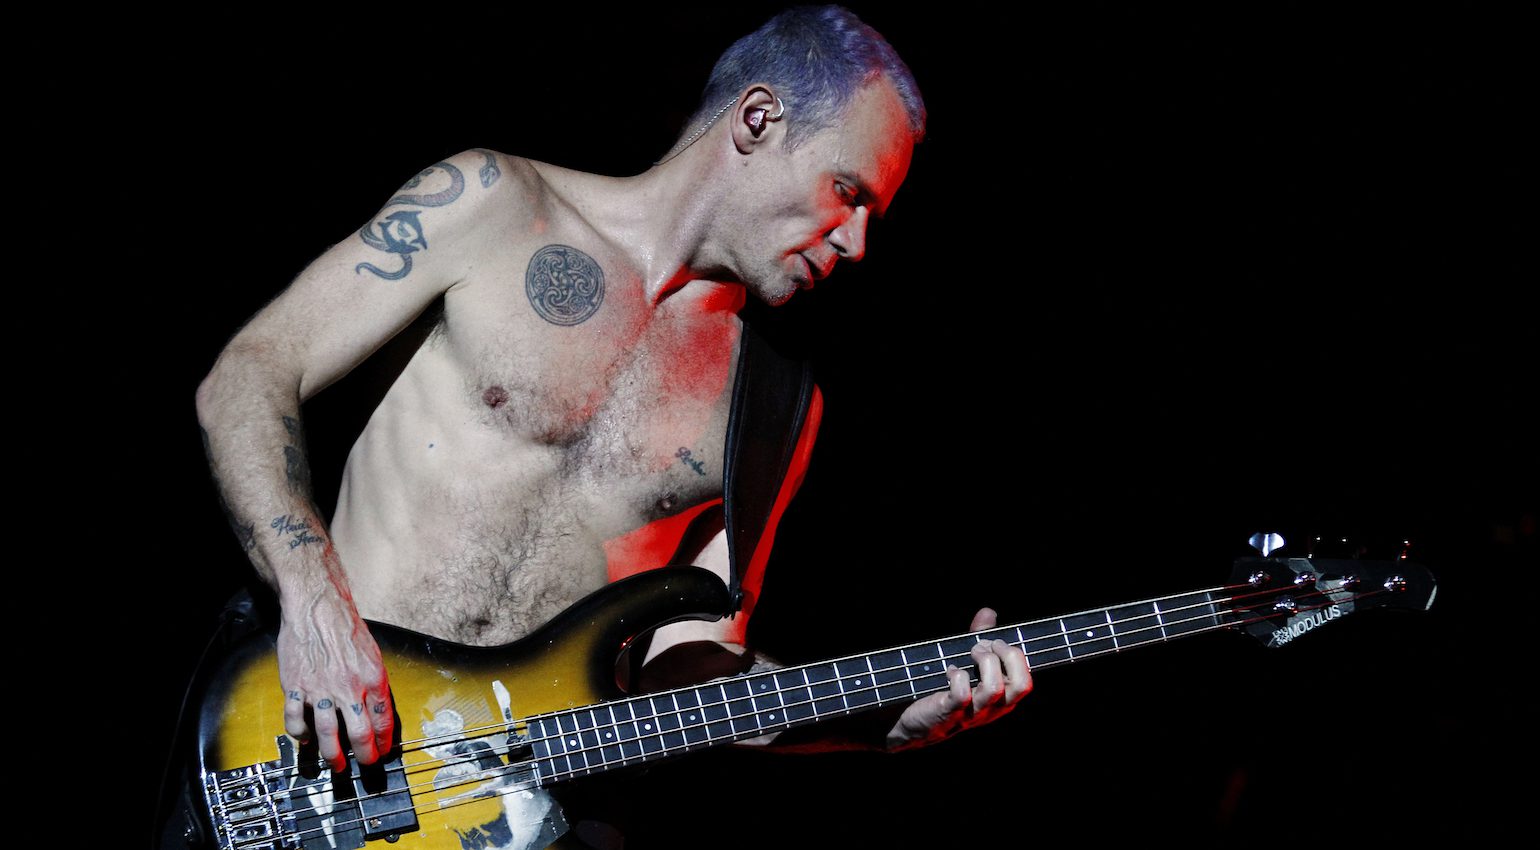 Flea performing with his Modulus bass.